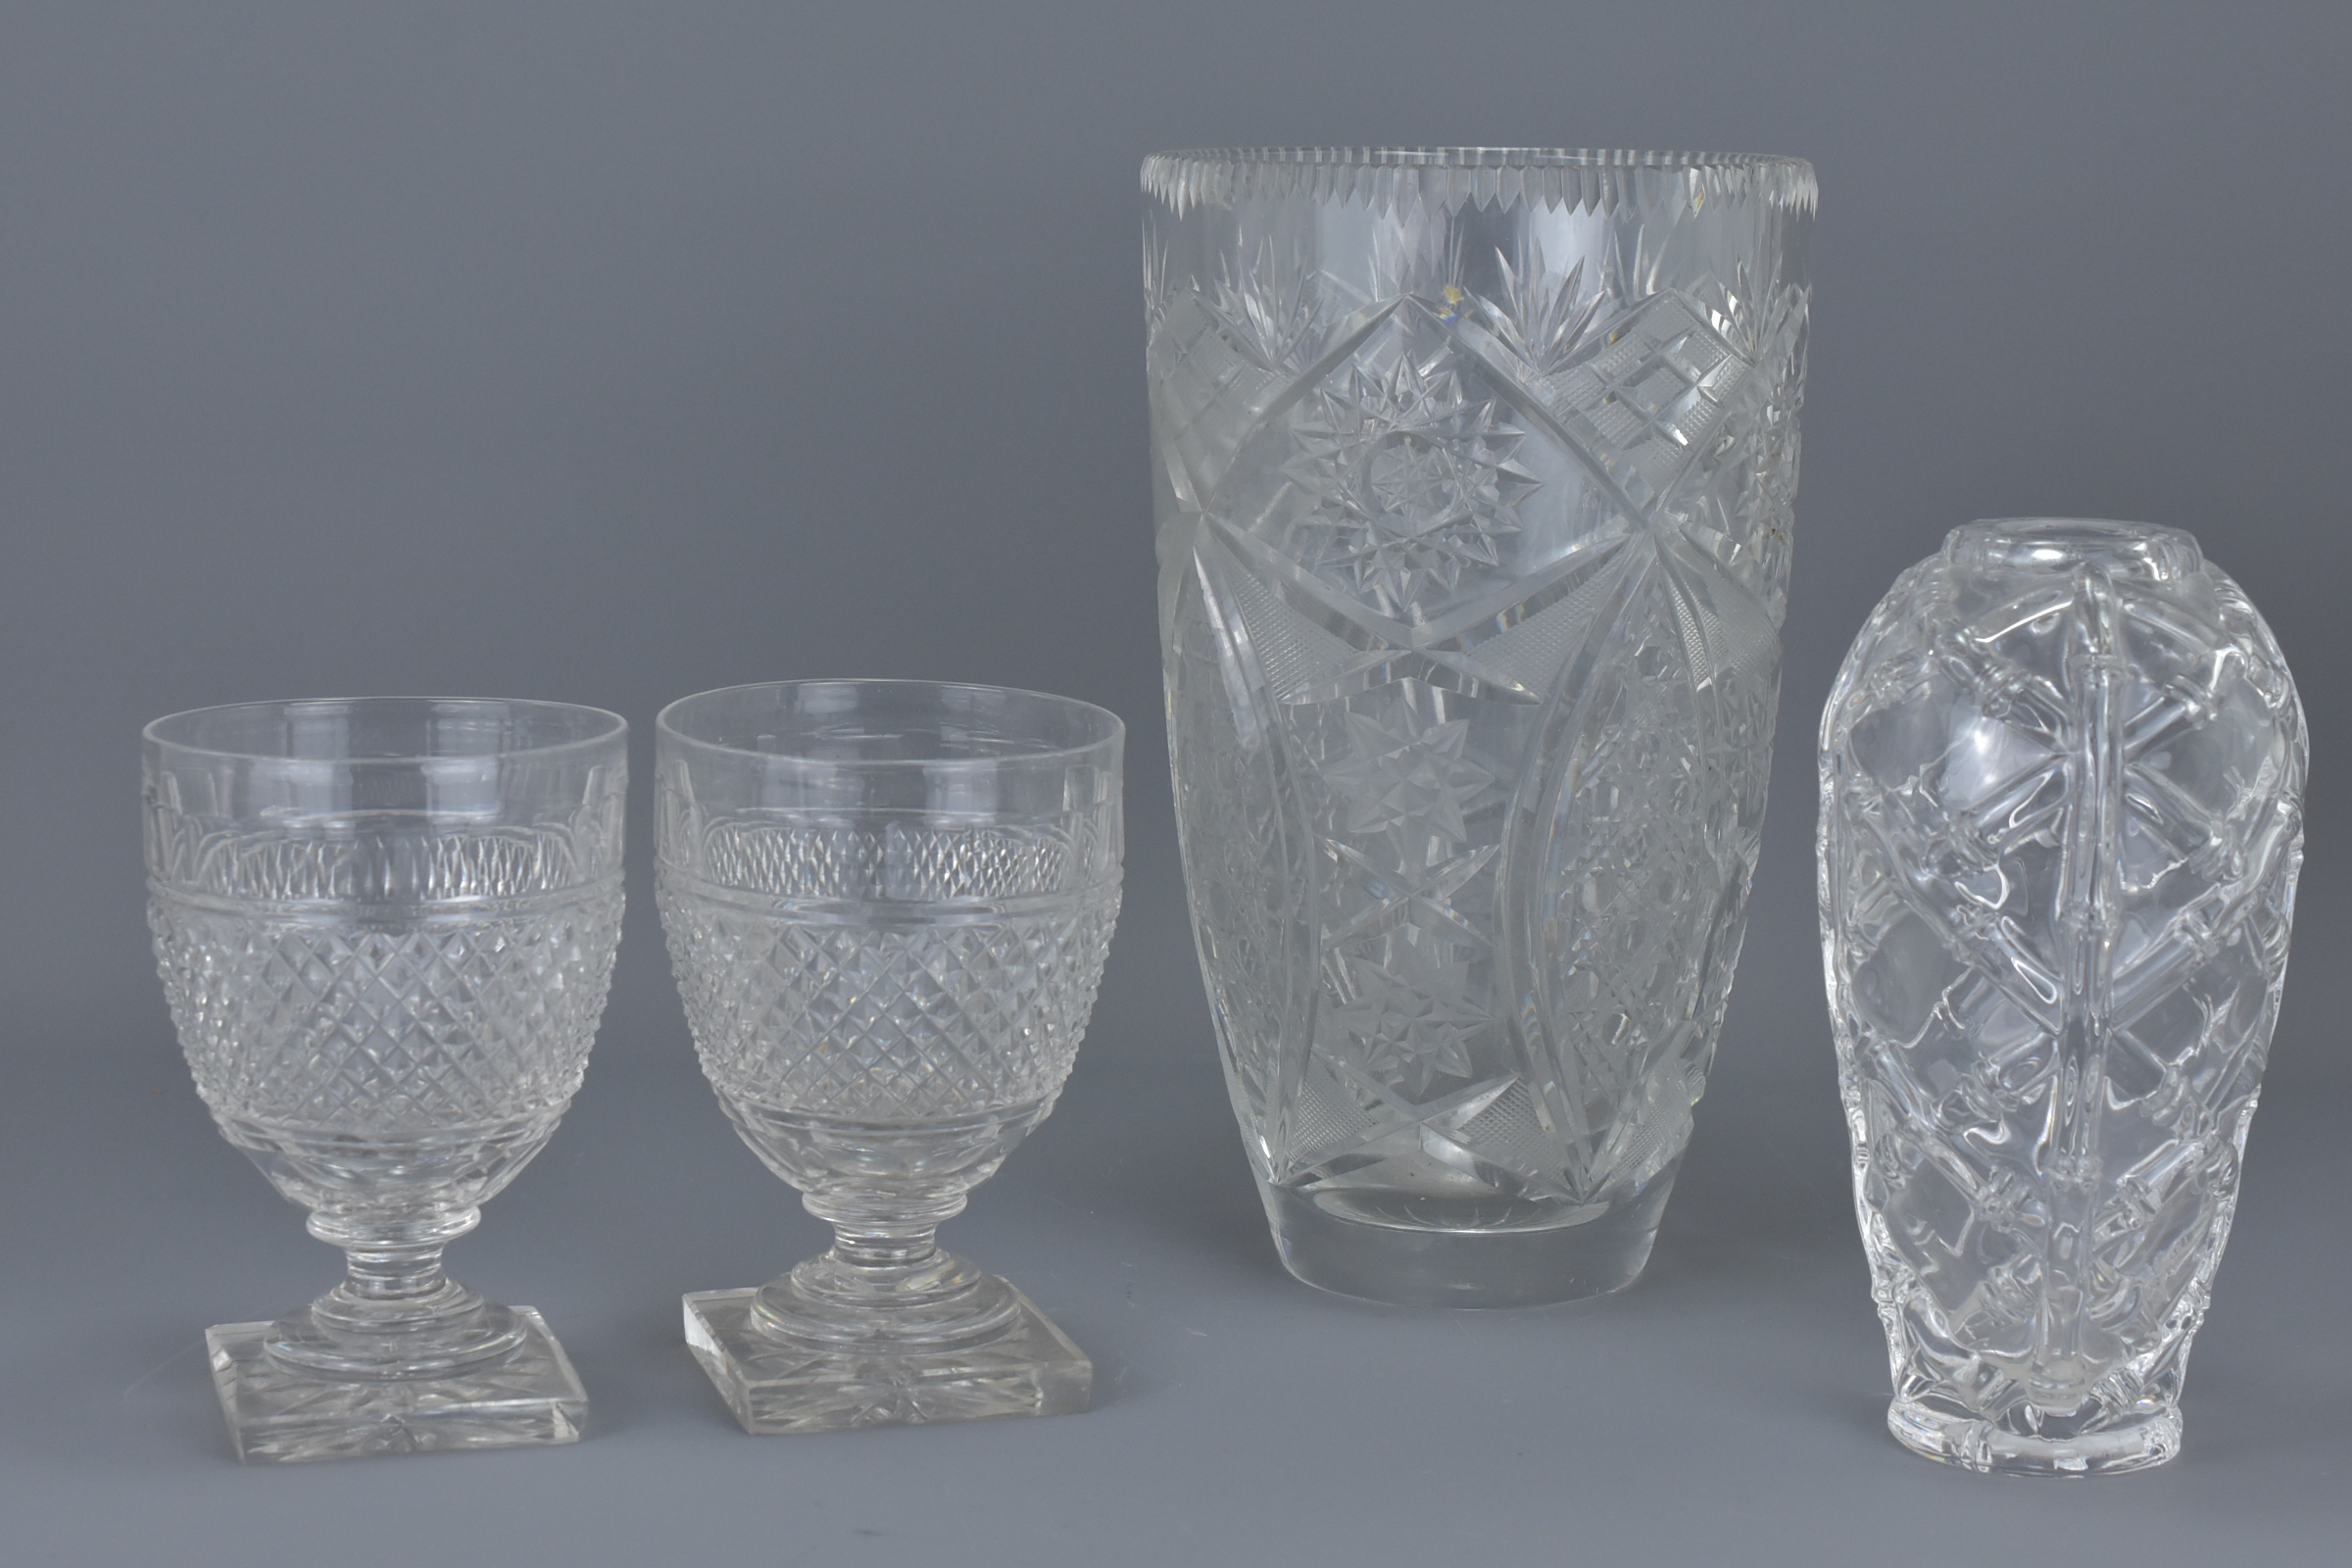 Pair of Georgian Hobnail Cut Glass Rummers / Drinking Glasses on Stepped Star Cut Square Bases toget